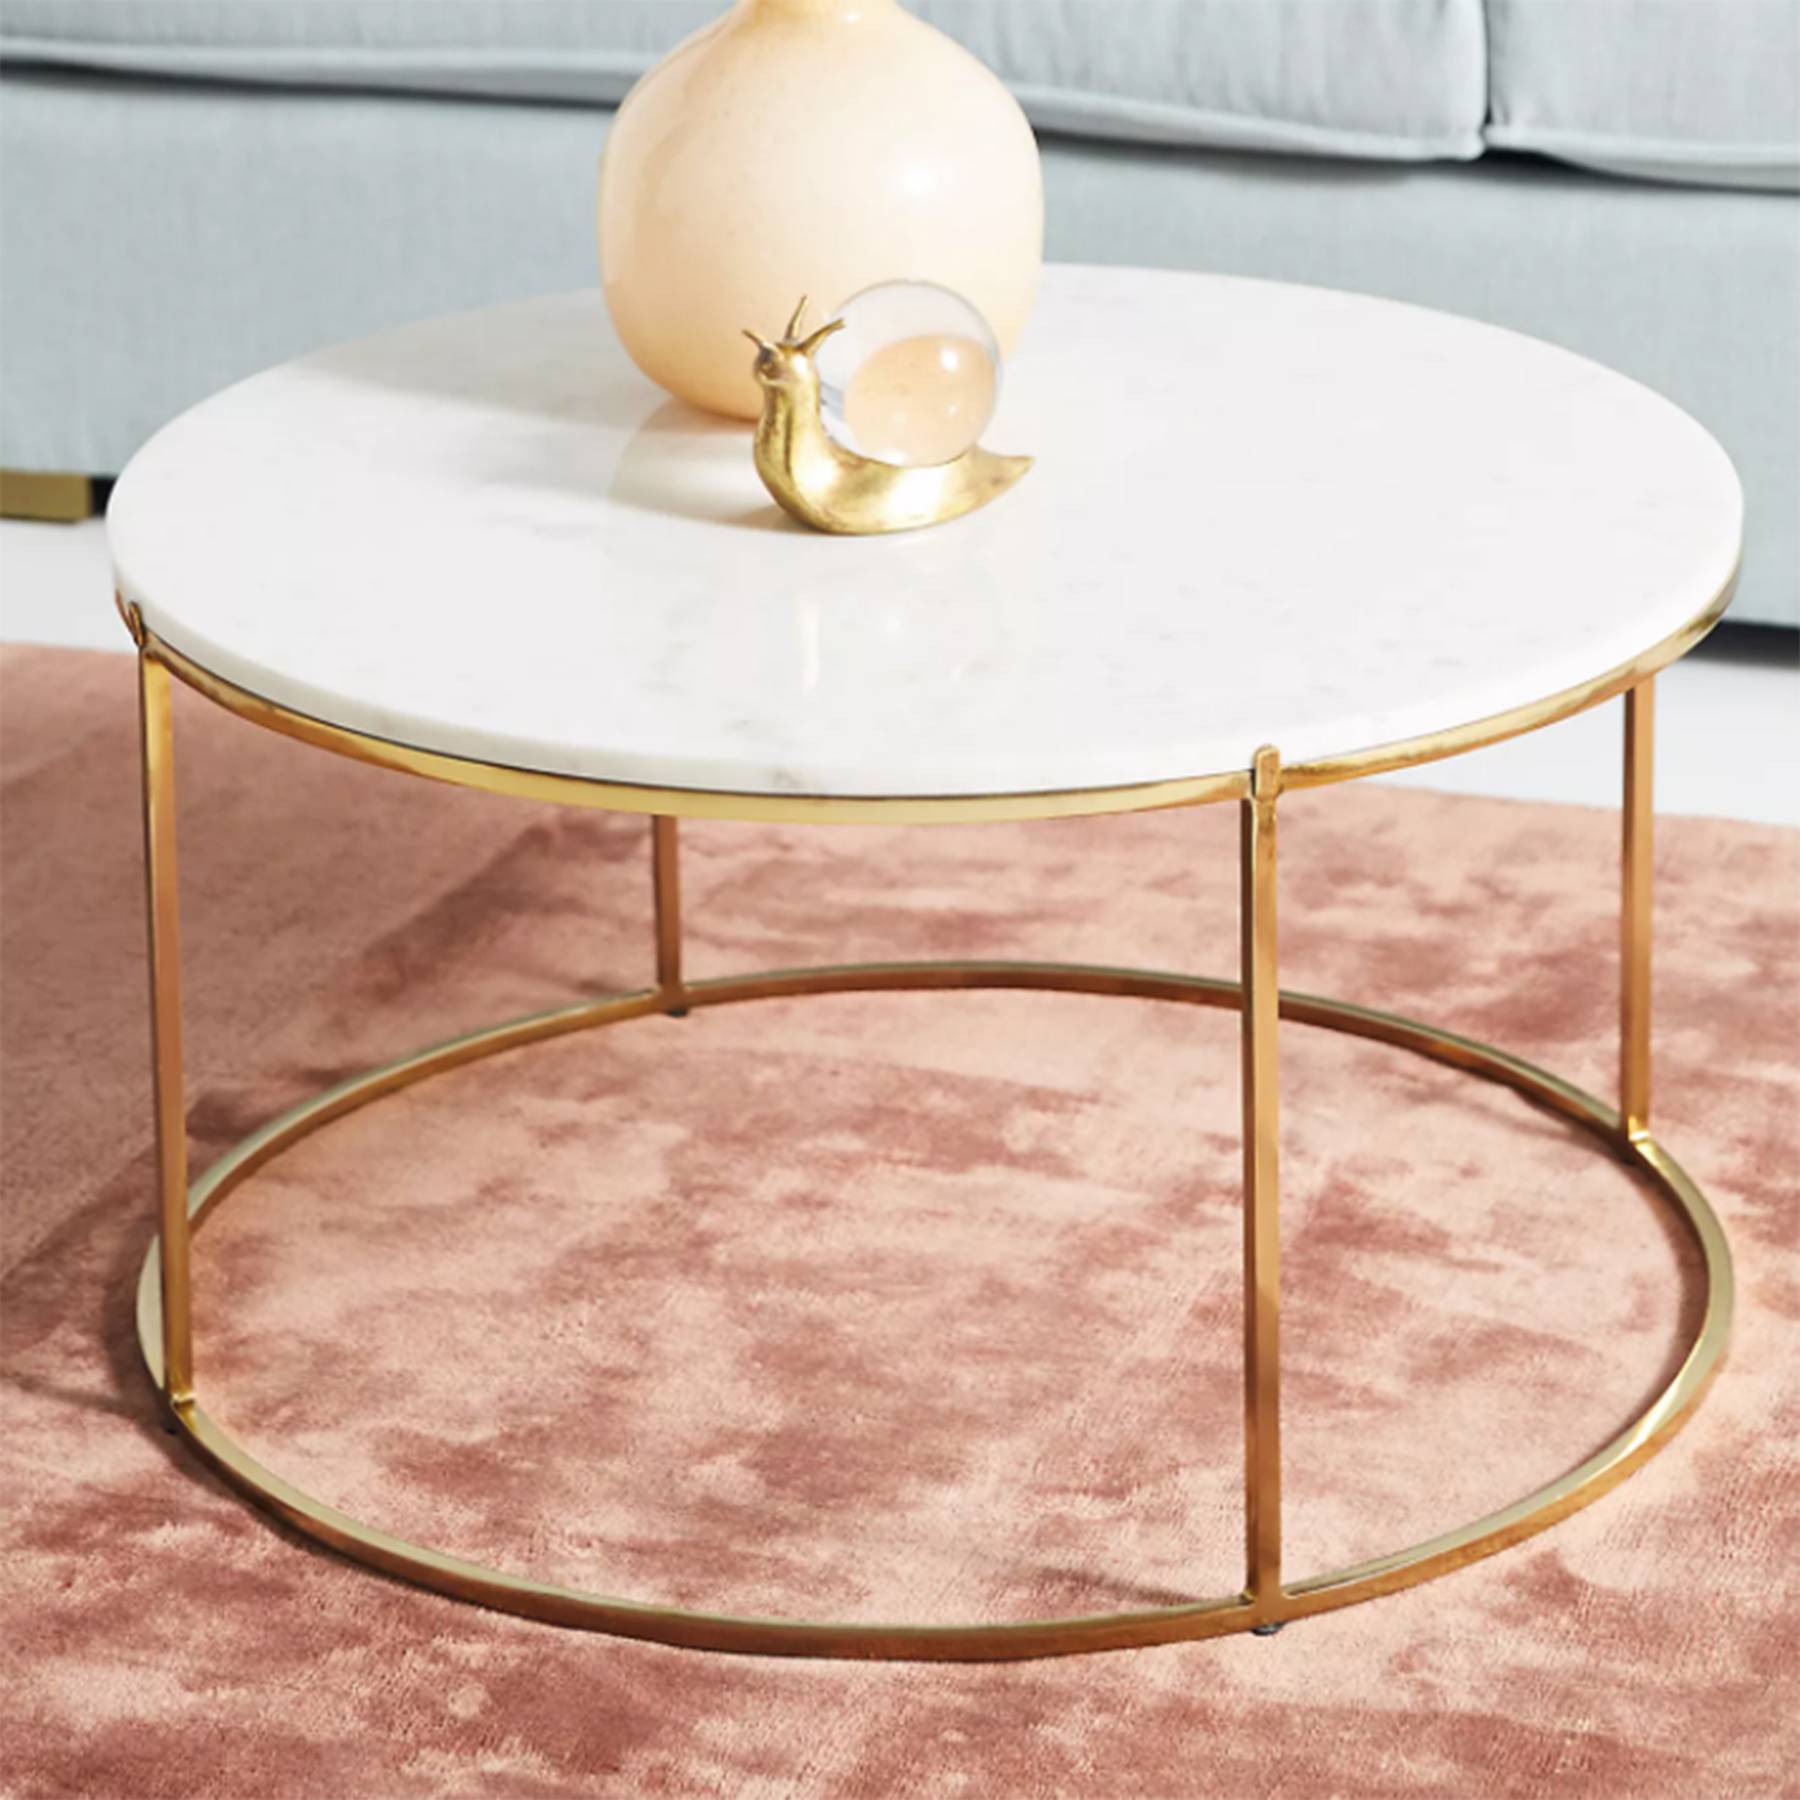 17 Stylish Functional Coffee Tables Best Coffee Tables 2021 Glamour Uk